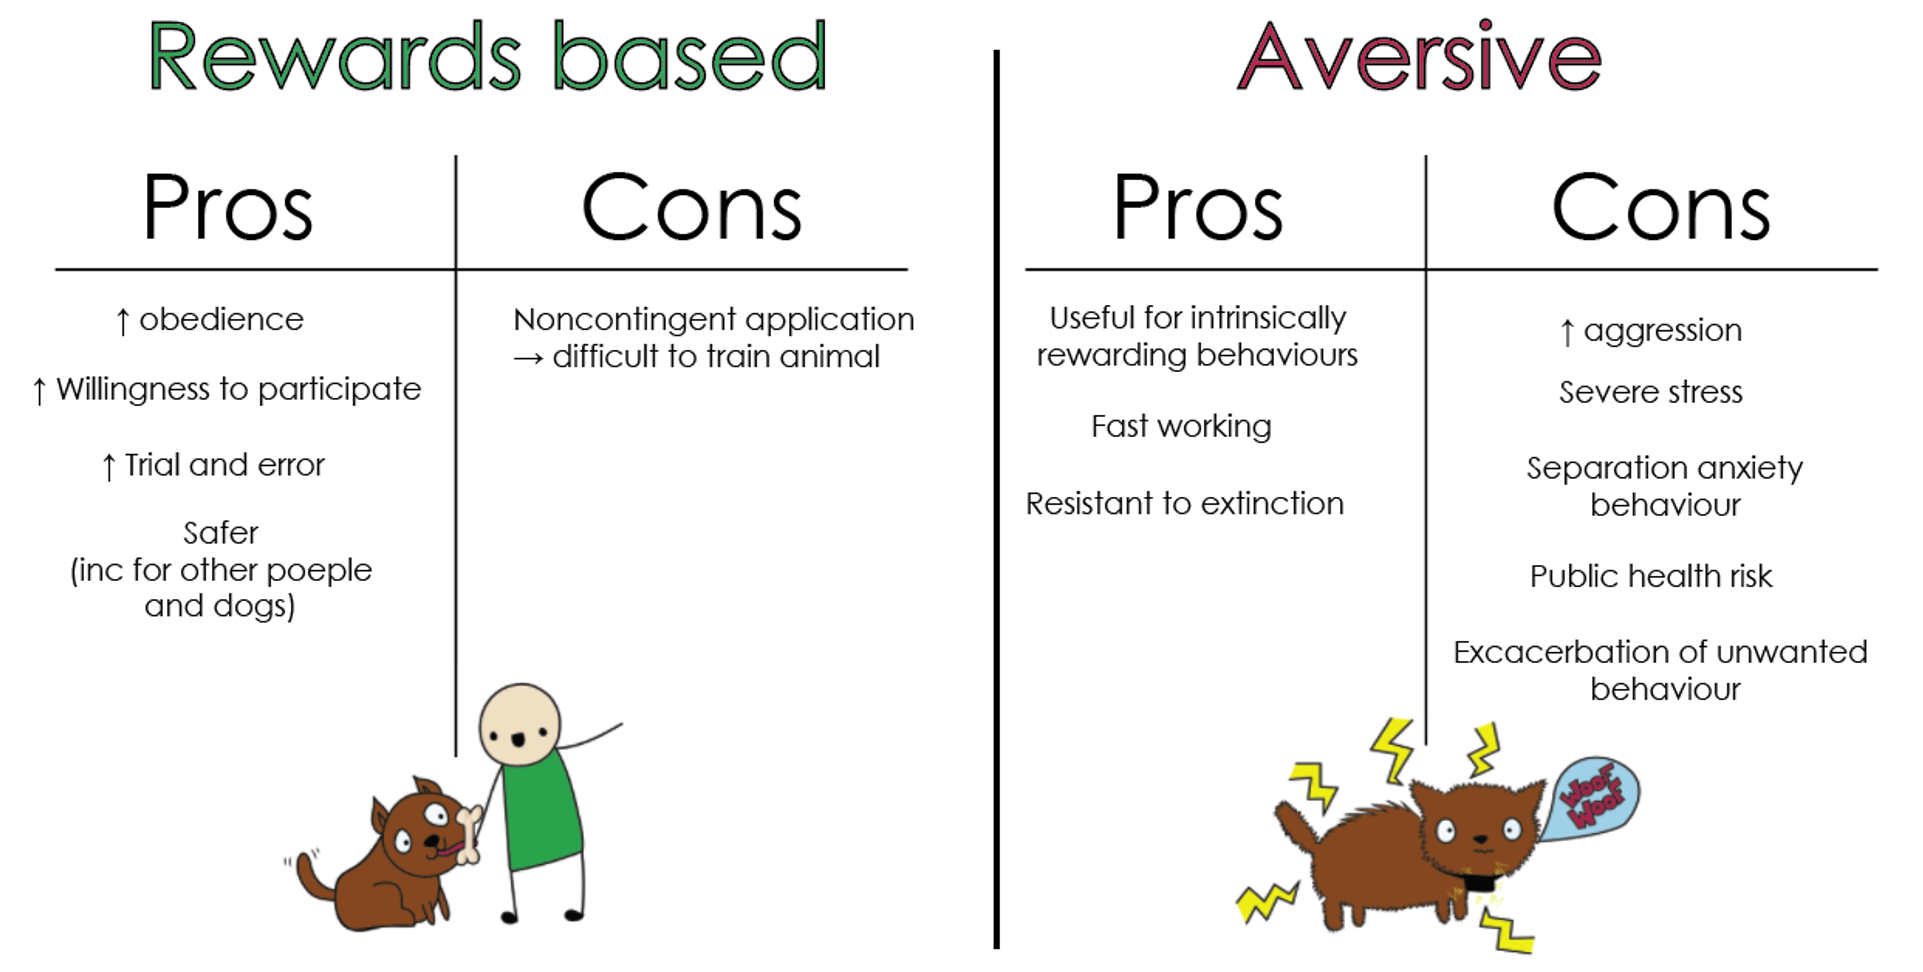 Image listing out pros and cons of aversive vs non-aversive techniques